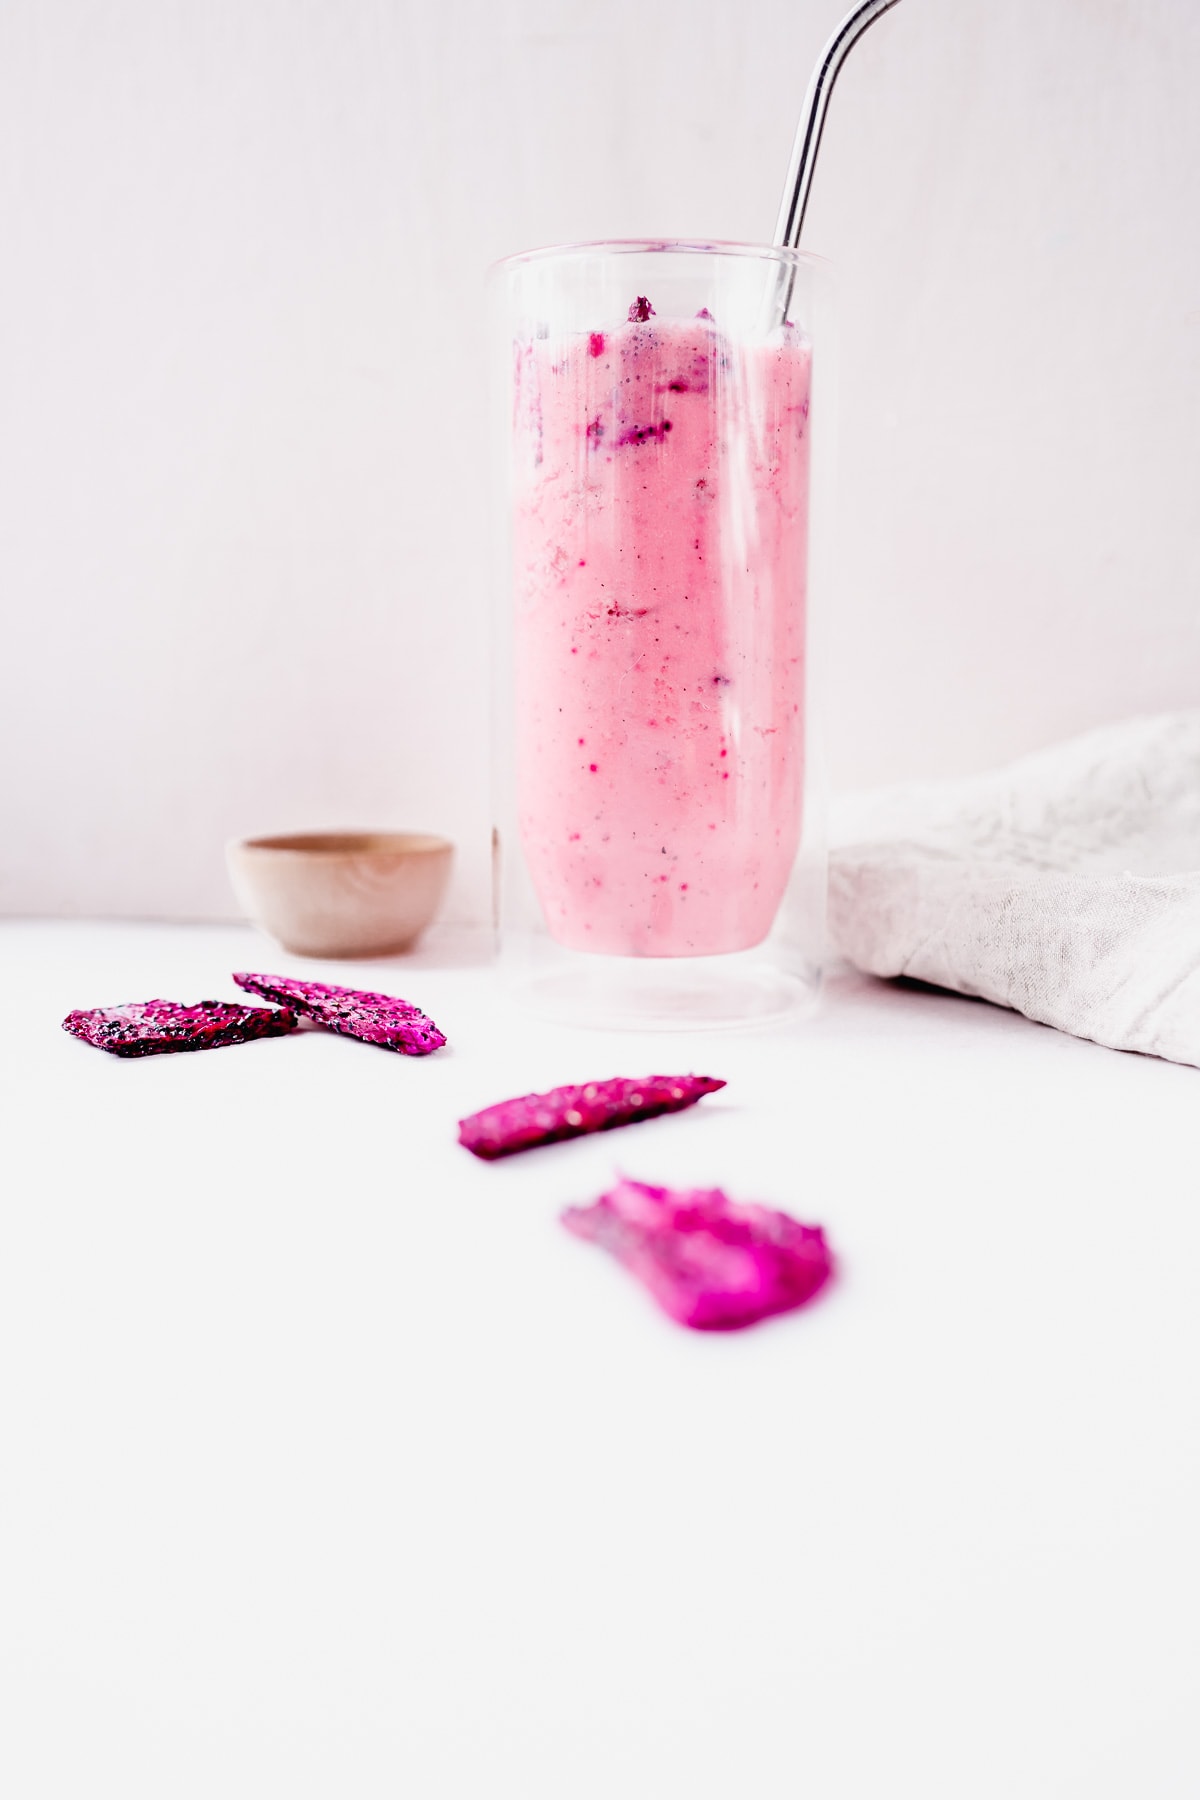 creamy and refreshing starbuck dragon fruit drink copycat recipe in a tall clear glass garnished with dragonfruit.